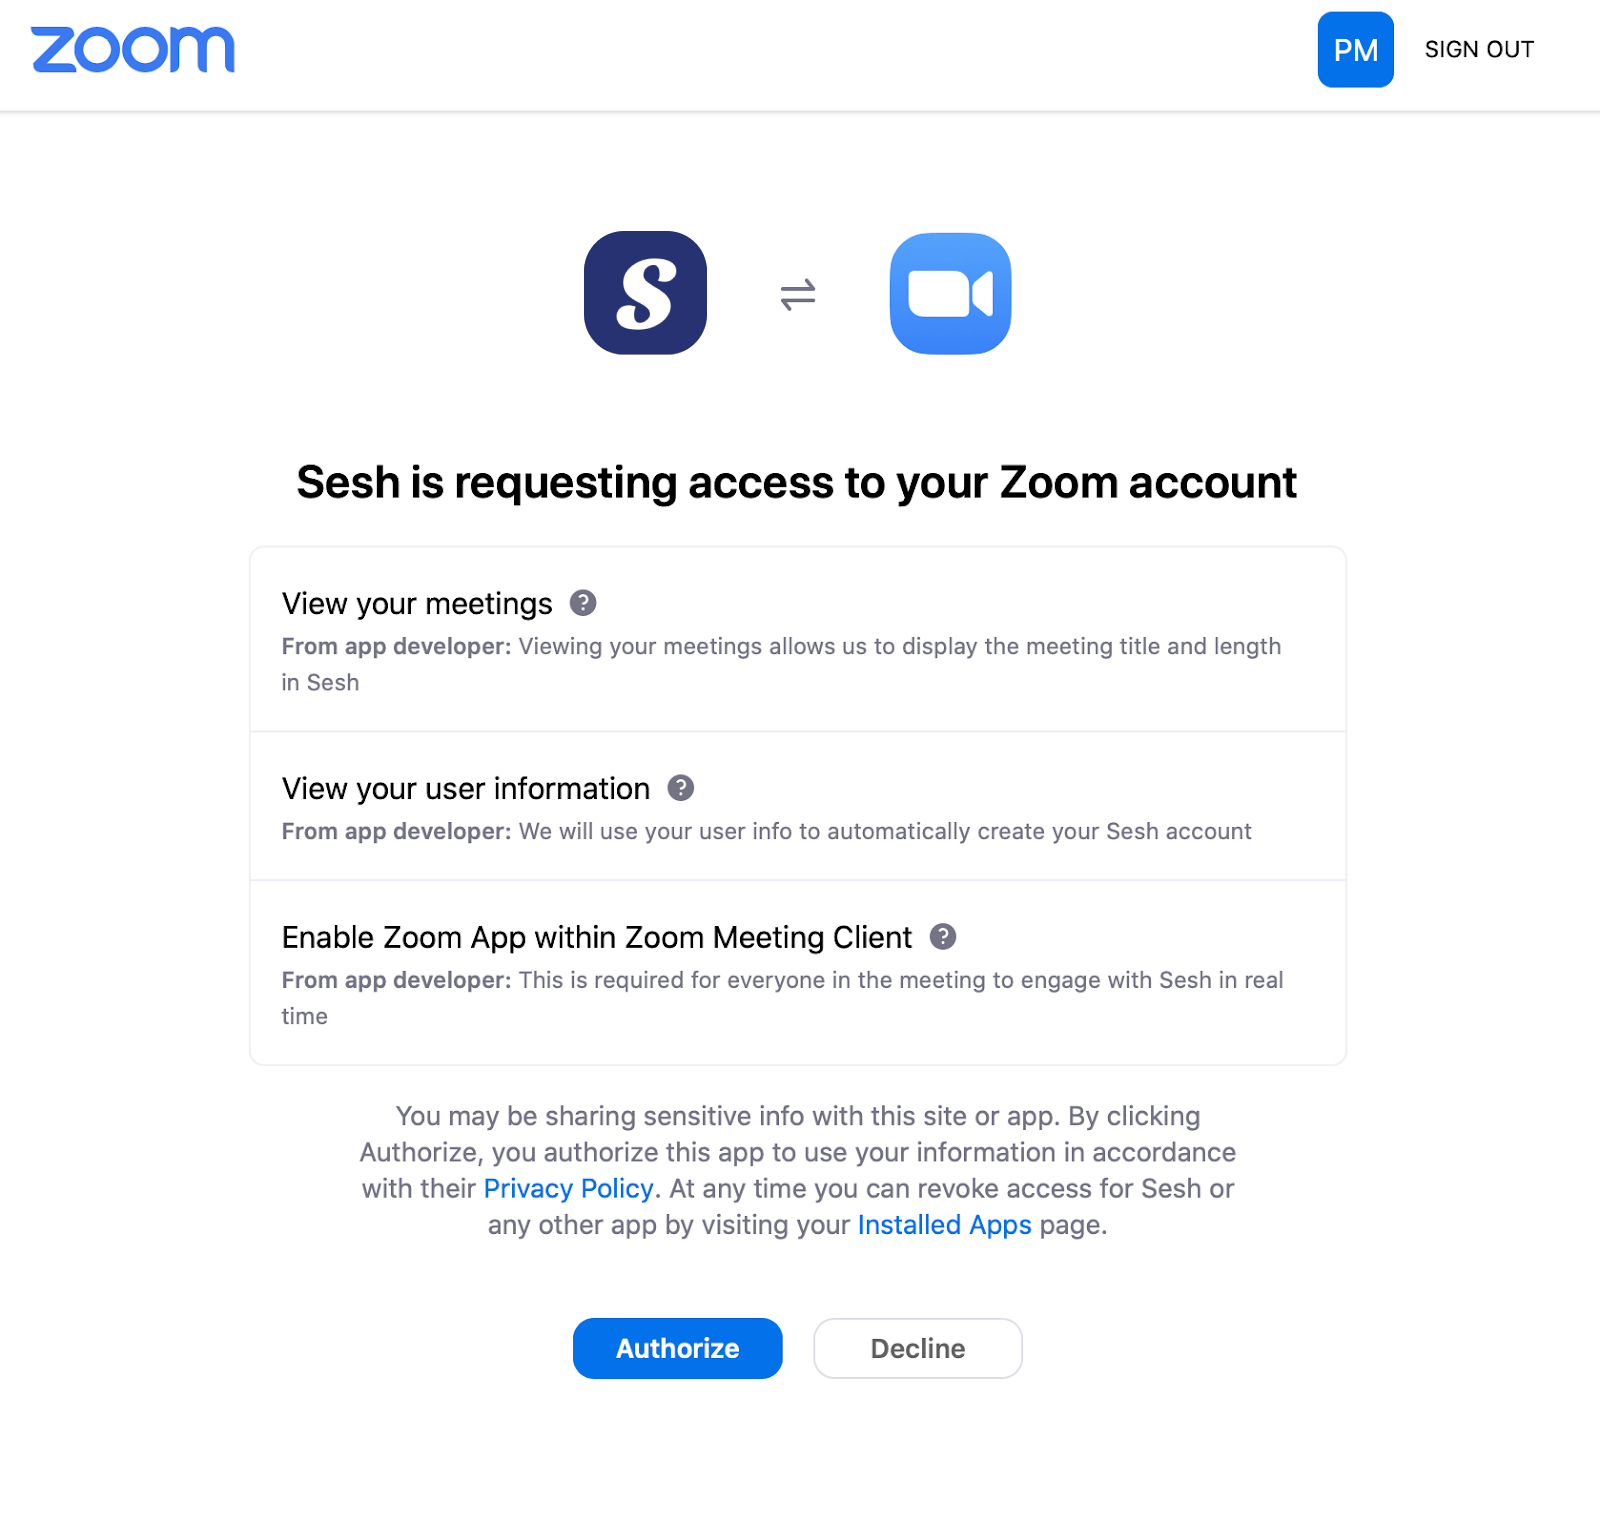 Authorize Zoom account access